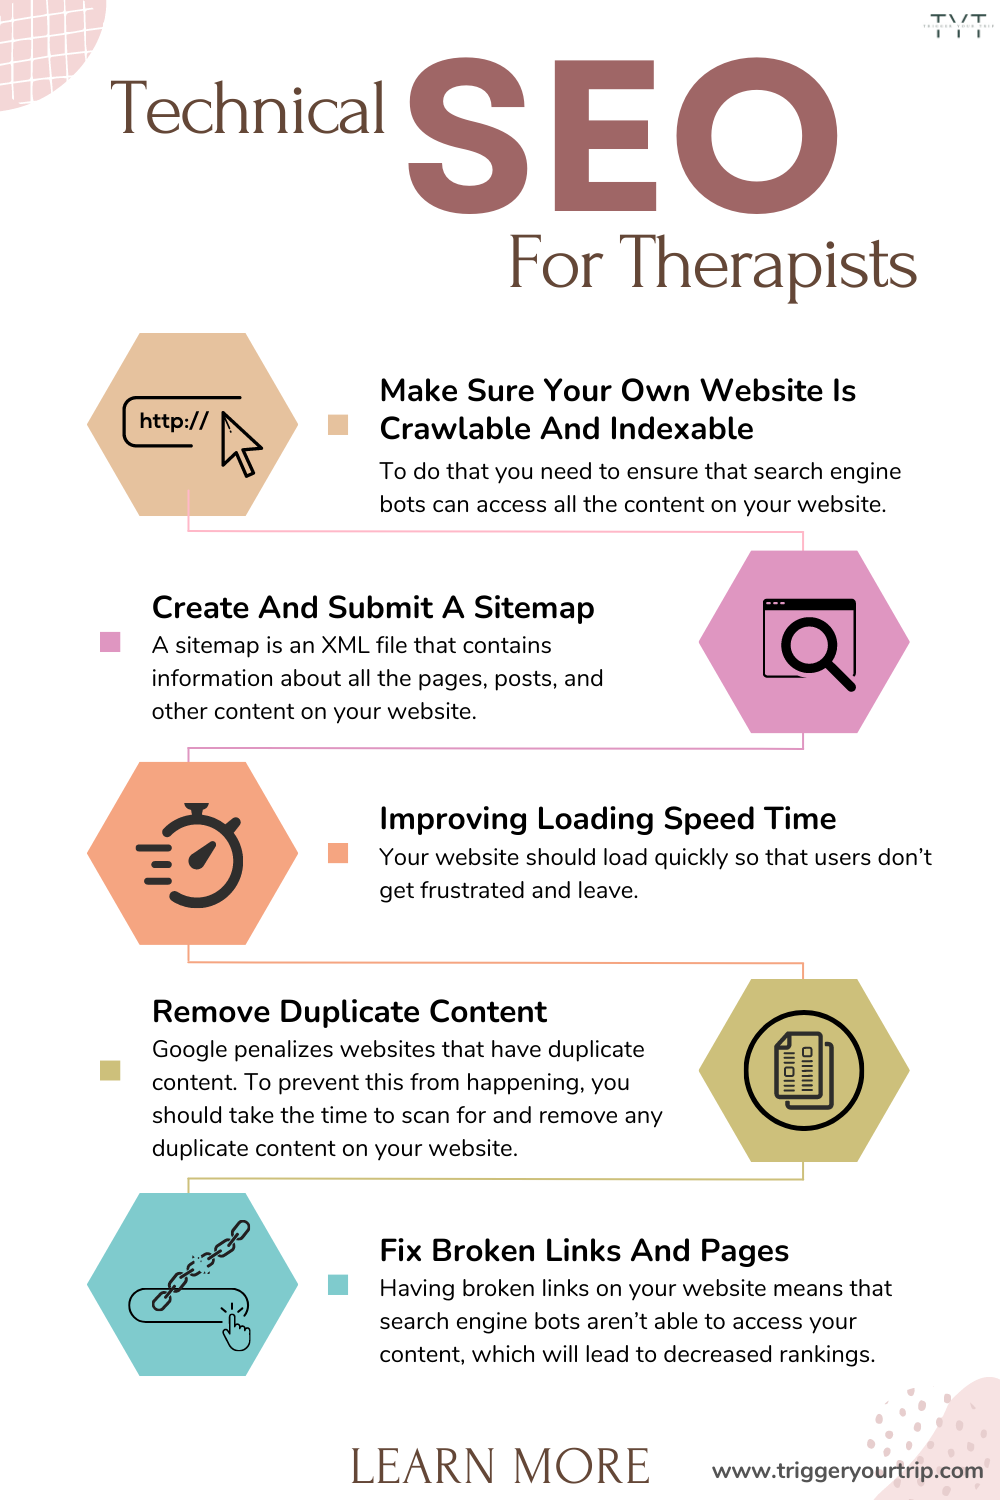 technical seo for therapists: skyrocket your therapy practice online and offer mental health services online alongside your private practice